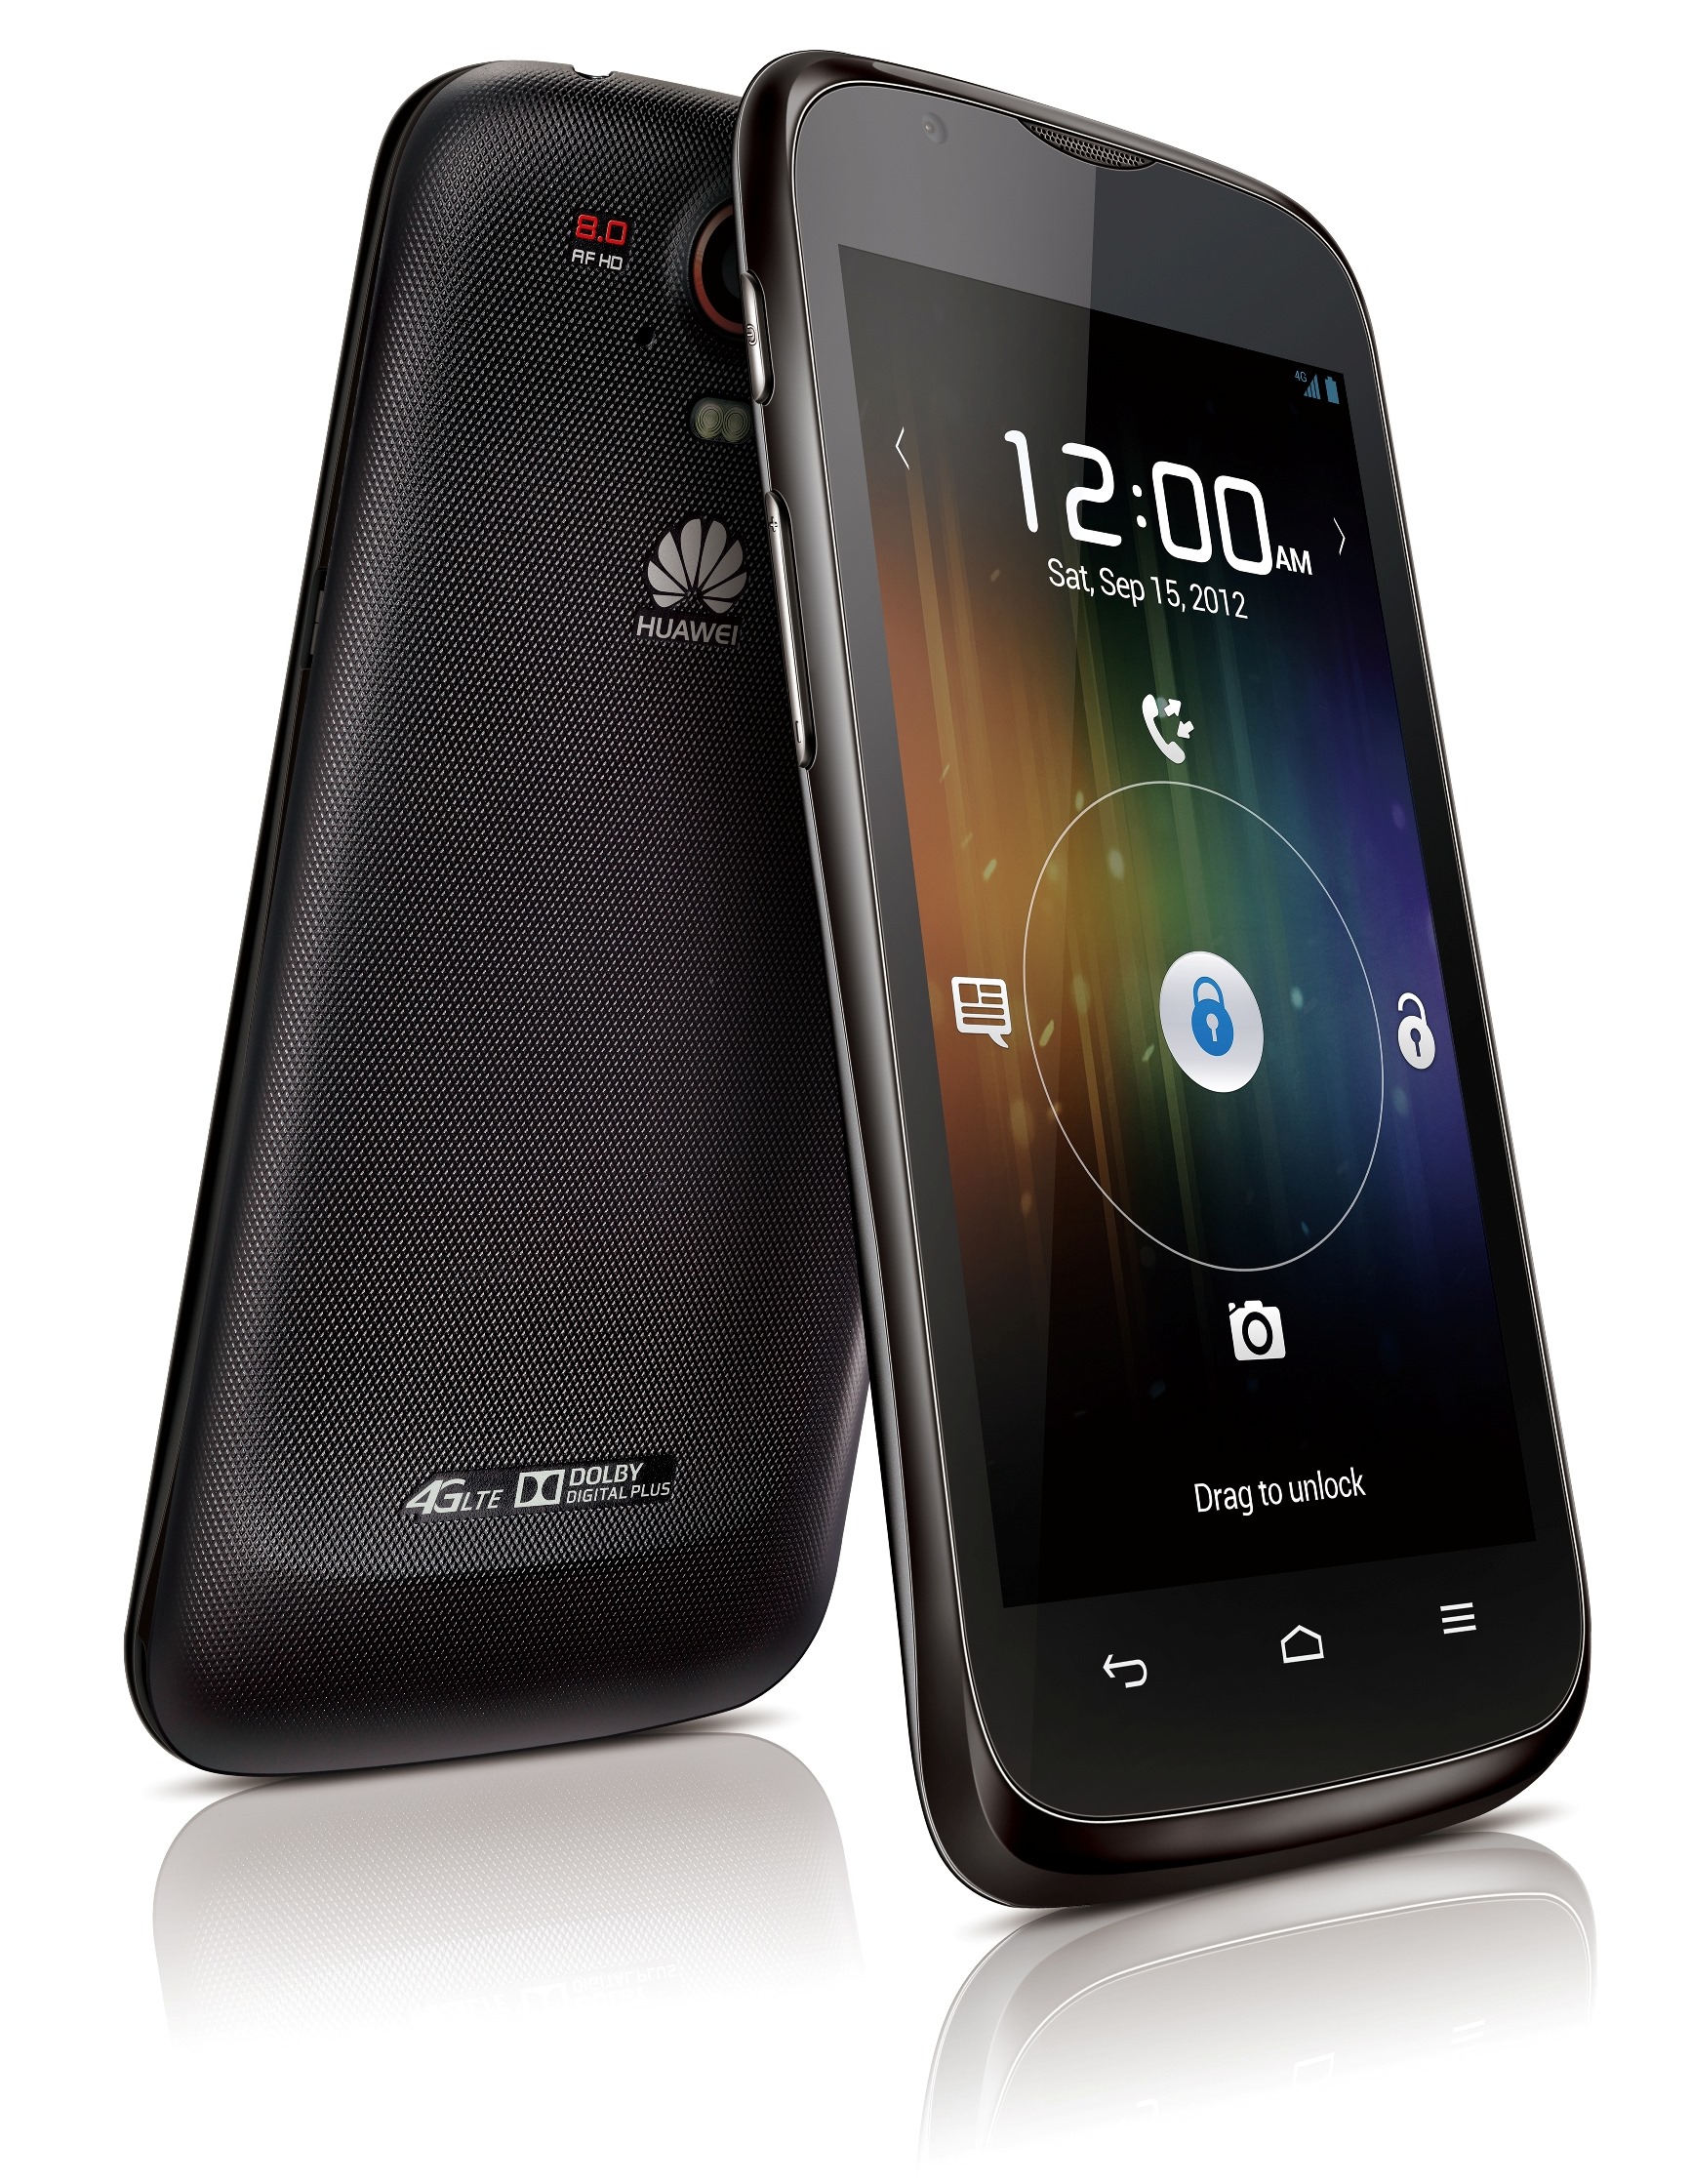 Huawei Ascend P1 LTE review   Mobile Phone   Trusted Reviews